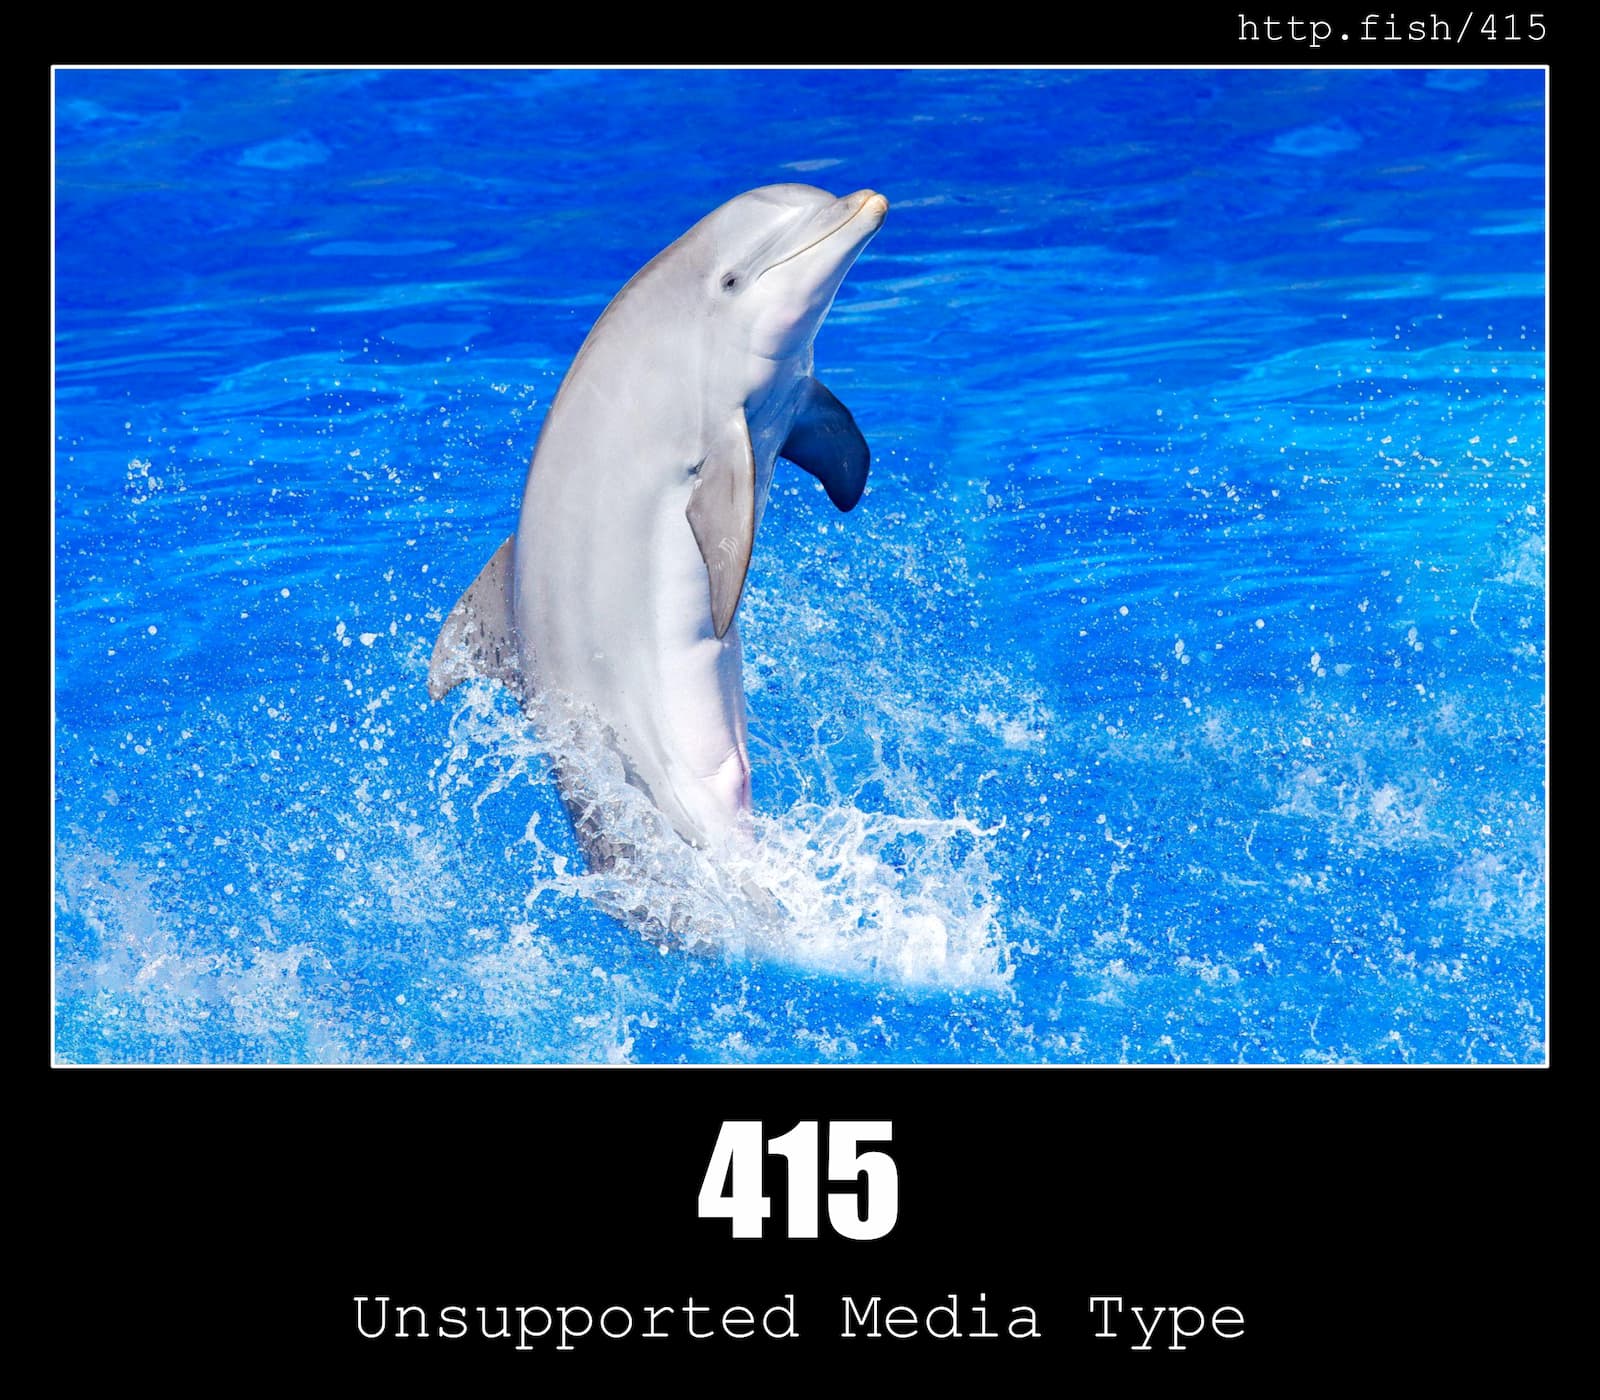 HTTP Status Code 415 Unsupported Media Type & Fish